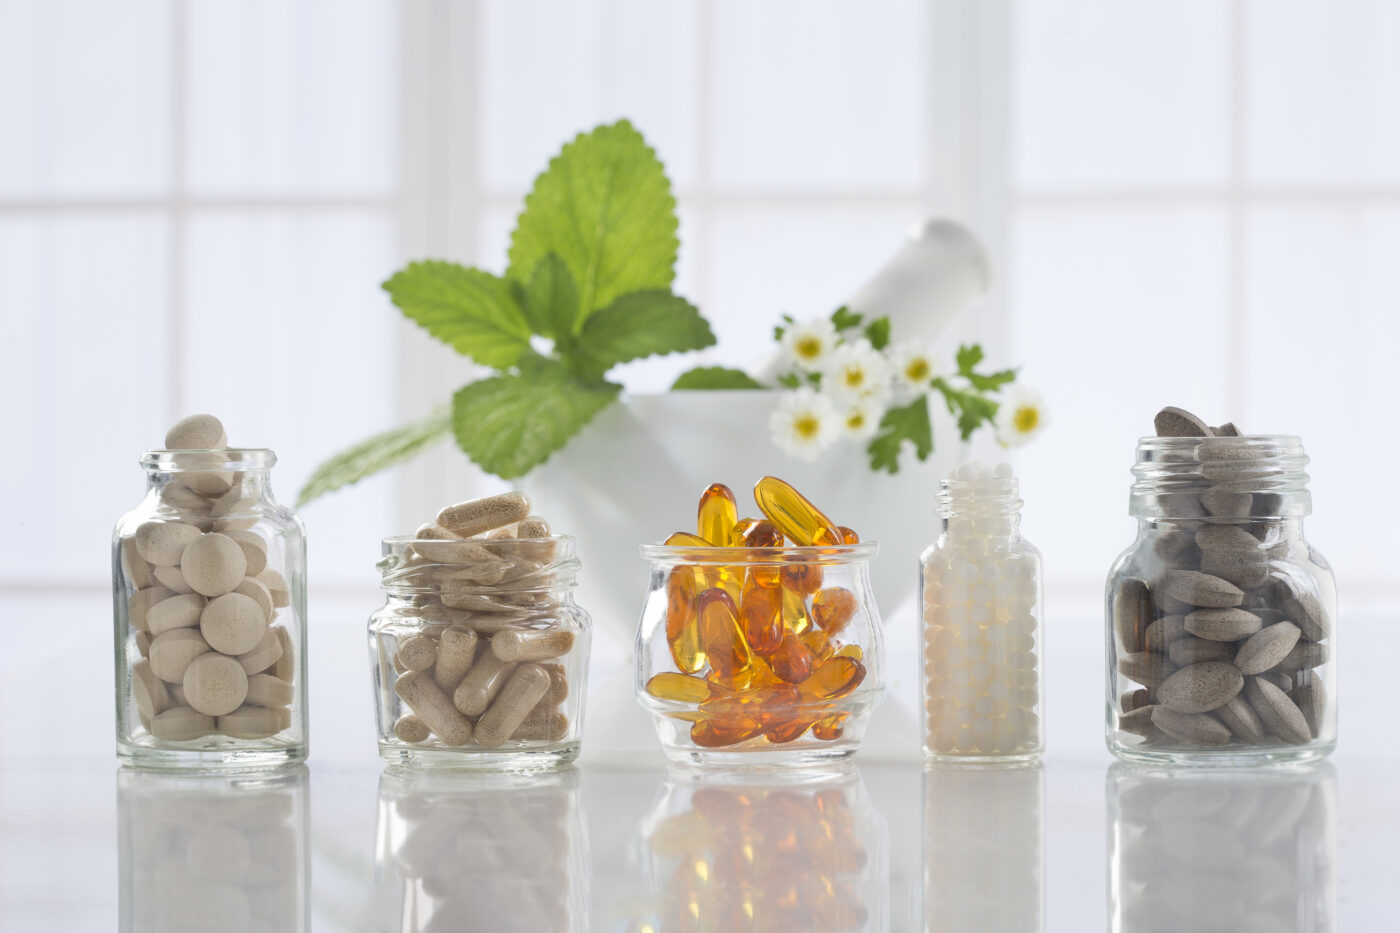 An Ultimate Guide: What You Need To Know About Dietary Supplements